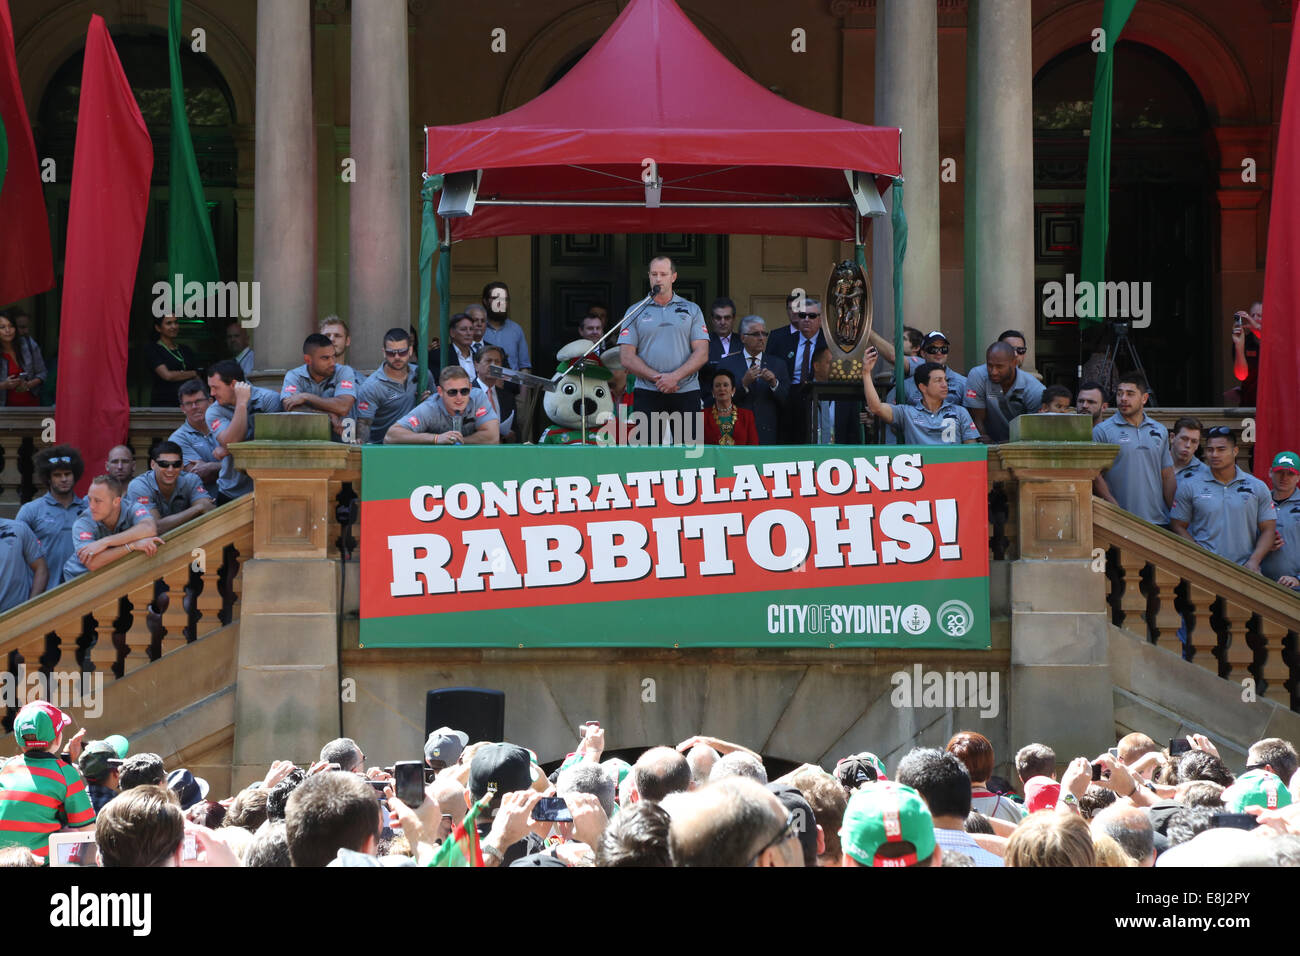 Sydney, NSW, Australia. 9th October 2014. After winning the NRL Grand Final, the South Sydney Rabbitohs were given the keys to the City of Sydney by the Lord Mayor at a ceremony in Sydney Square watched by fans of the rugby team. Pictured: is South Sydney Rabbitohs Coach Michael Maguire speaking to fans after being presented with the keys to the City of Sydney, after the team won the NRL Grand Final. Copyright Credit:  2014 Richard Milnes/Alamy Live News. Stock Photo